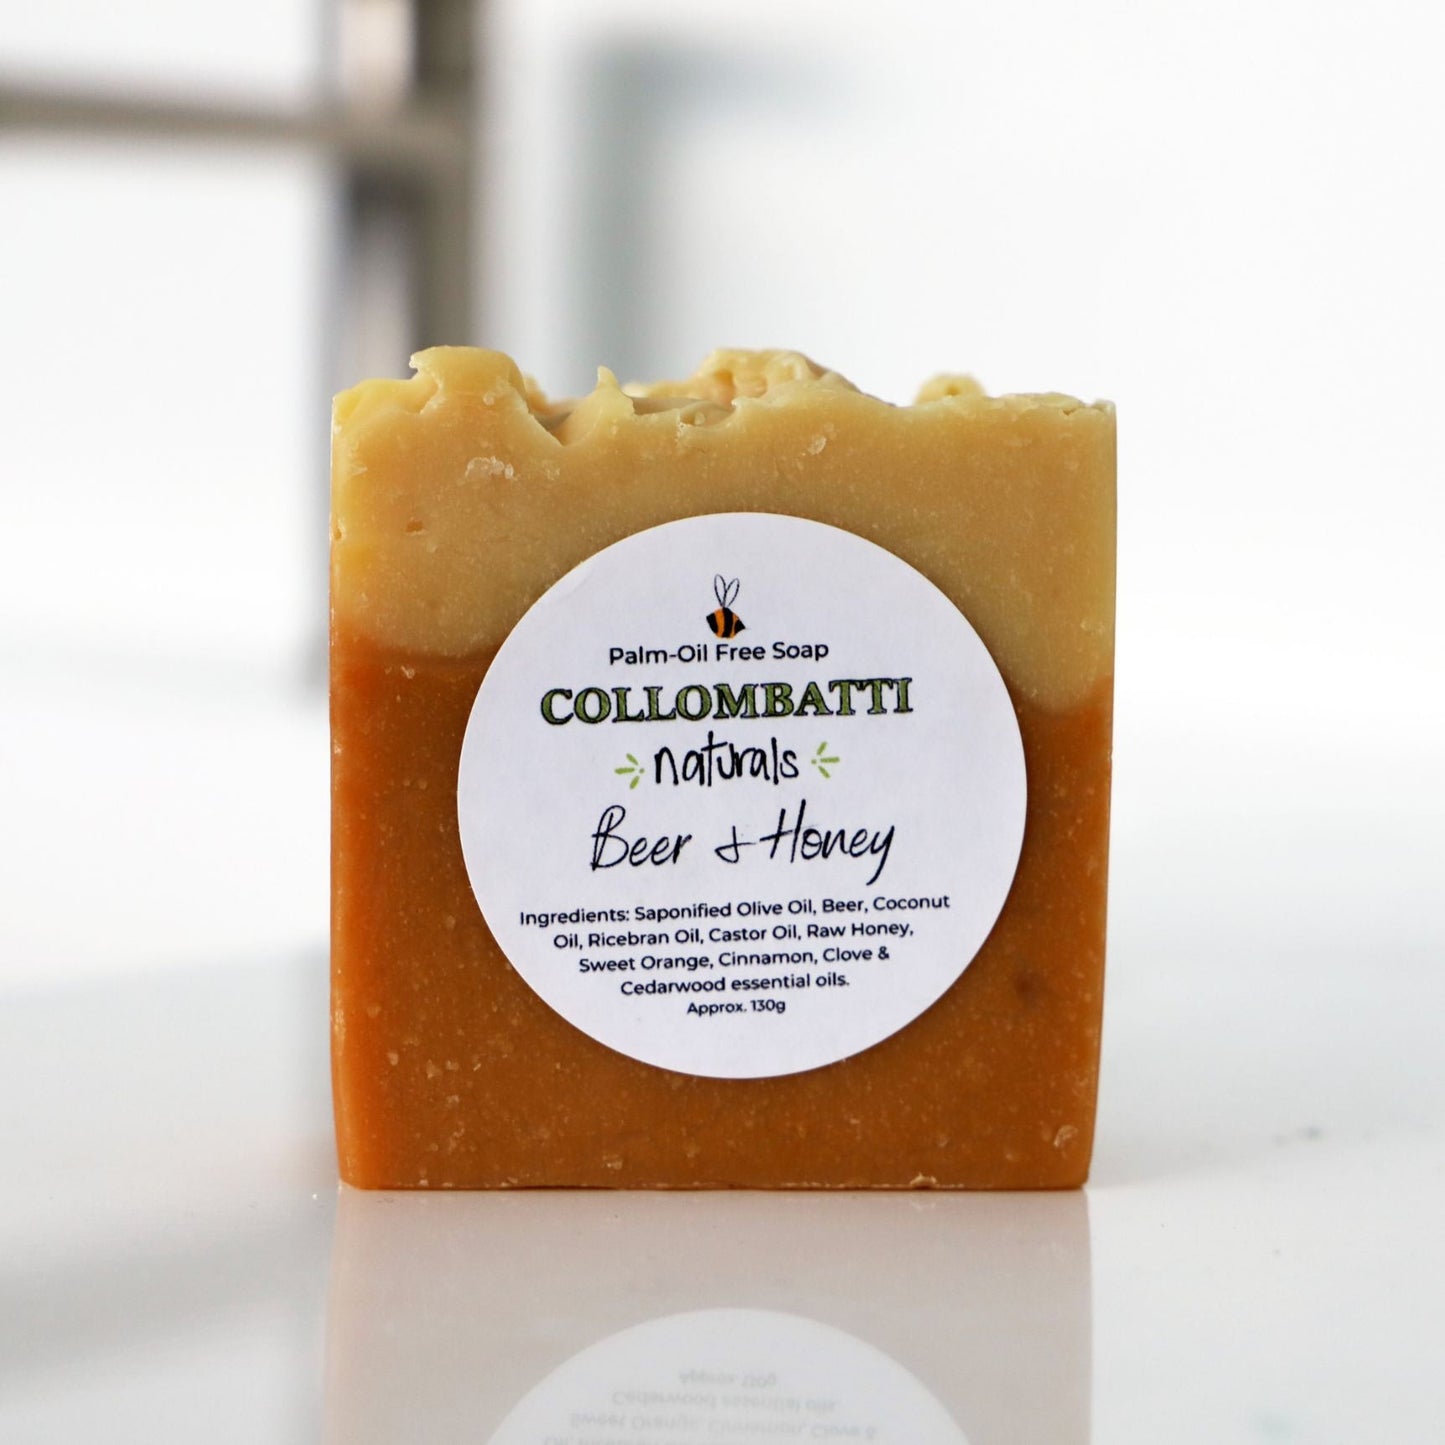 Collombatti Naturals handmade with beer and honey